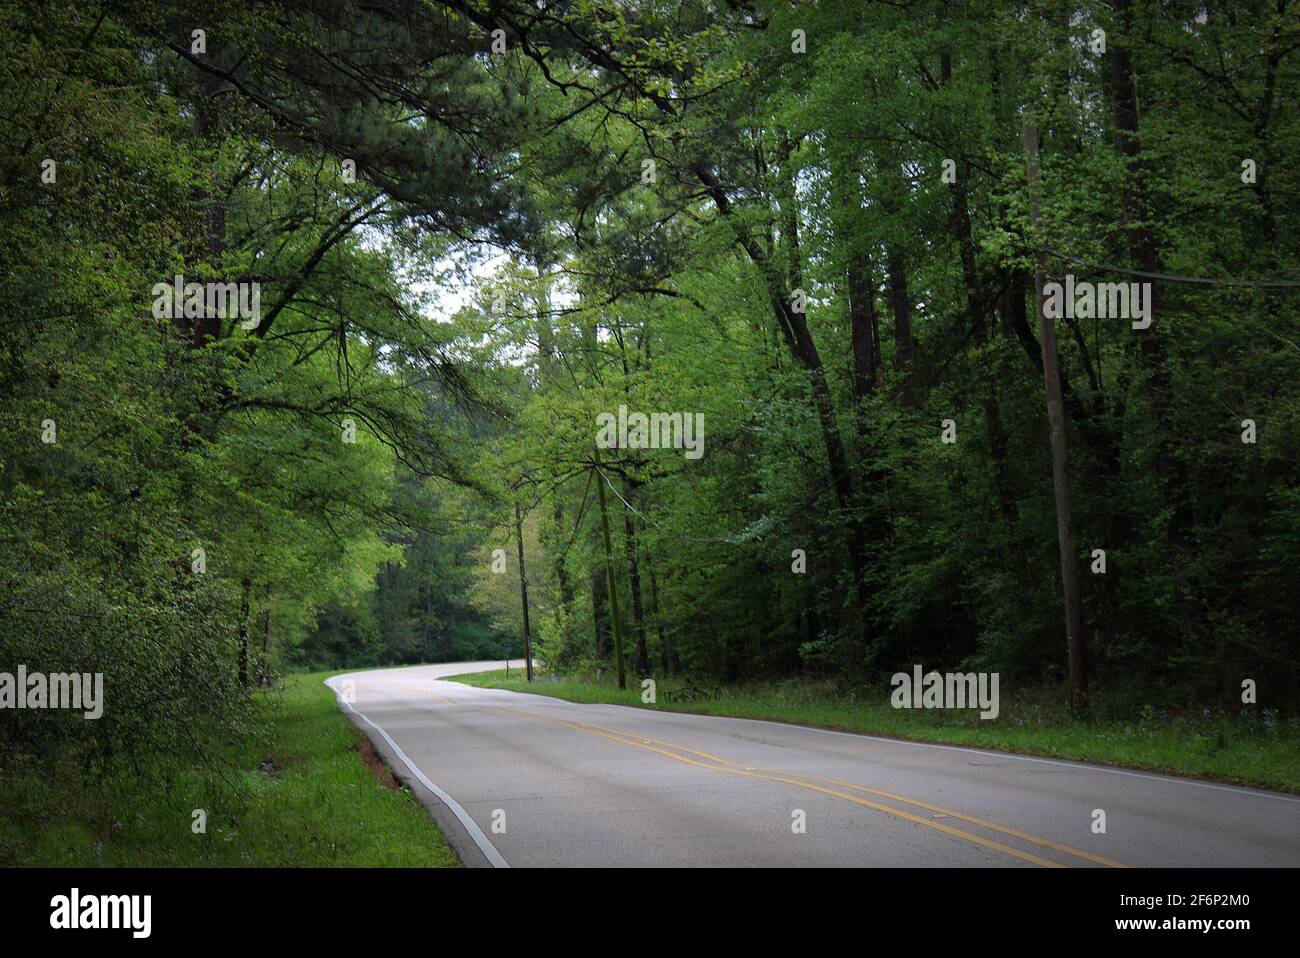 a country road curving deeper into the forest Stock Photo